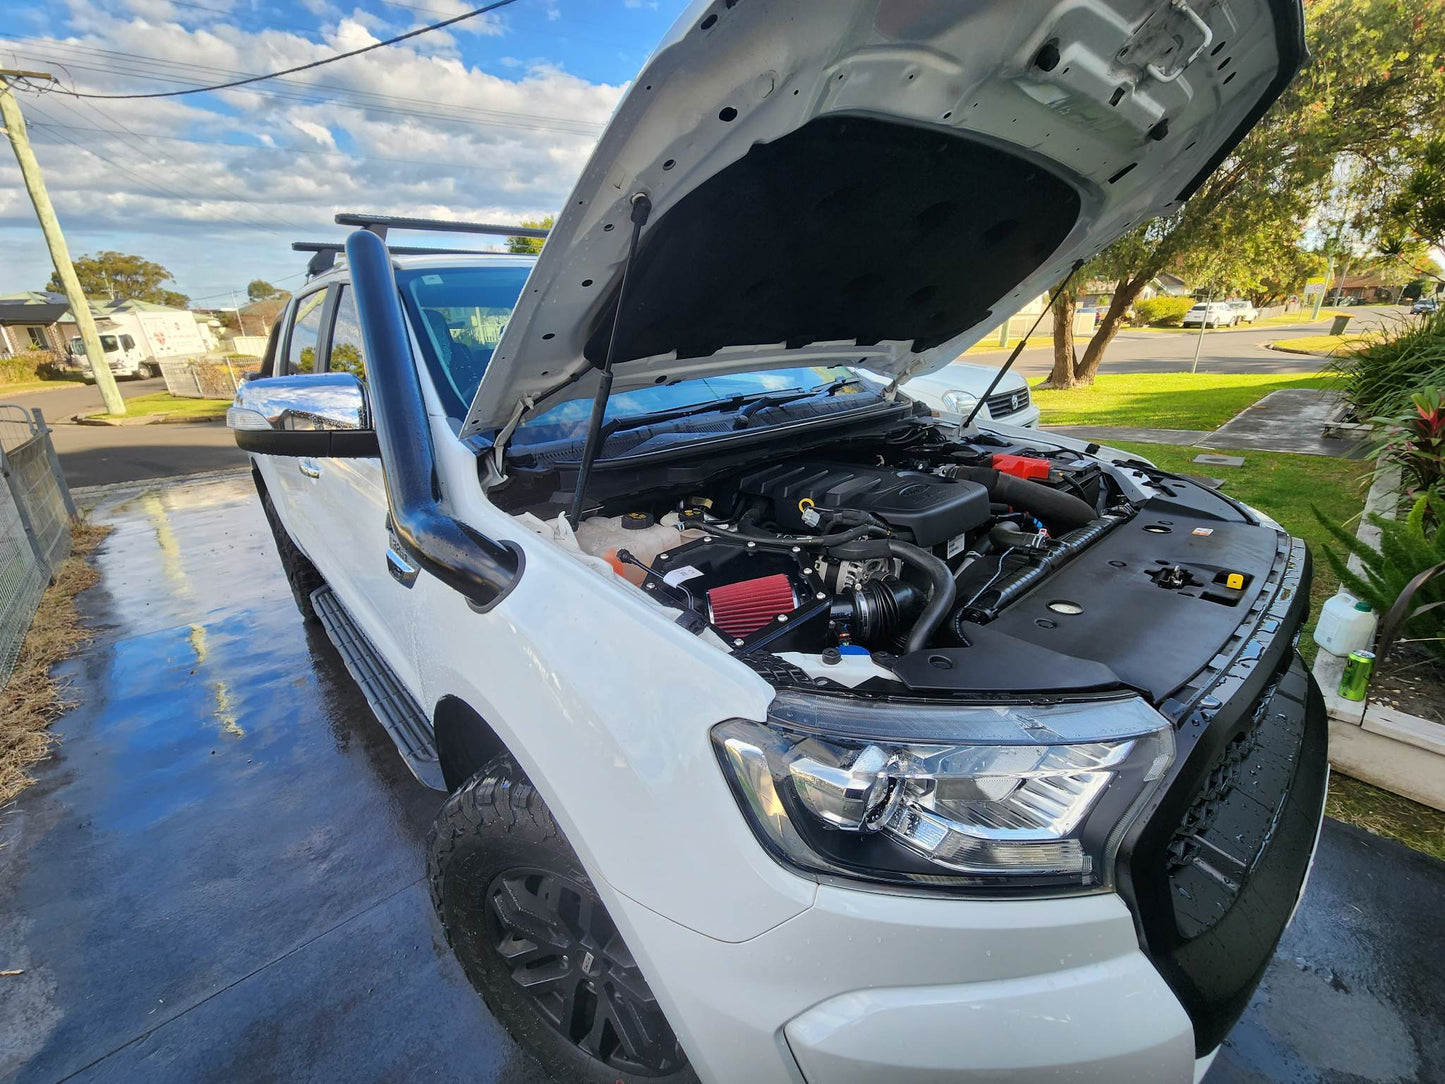 Ford Ranger Airbox (PX Series)